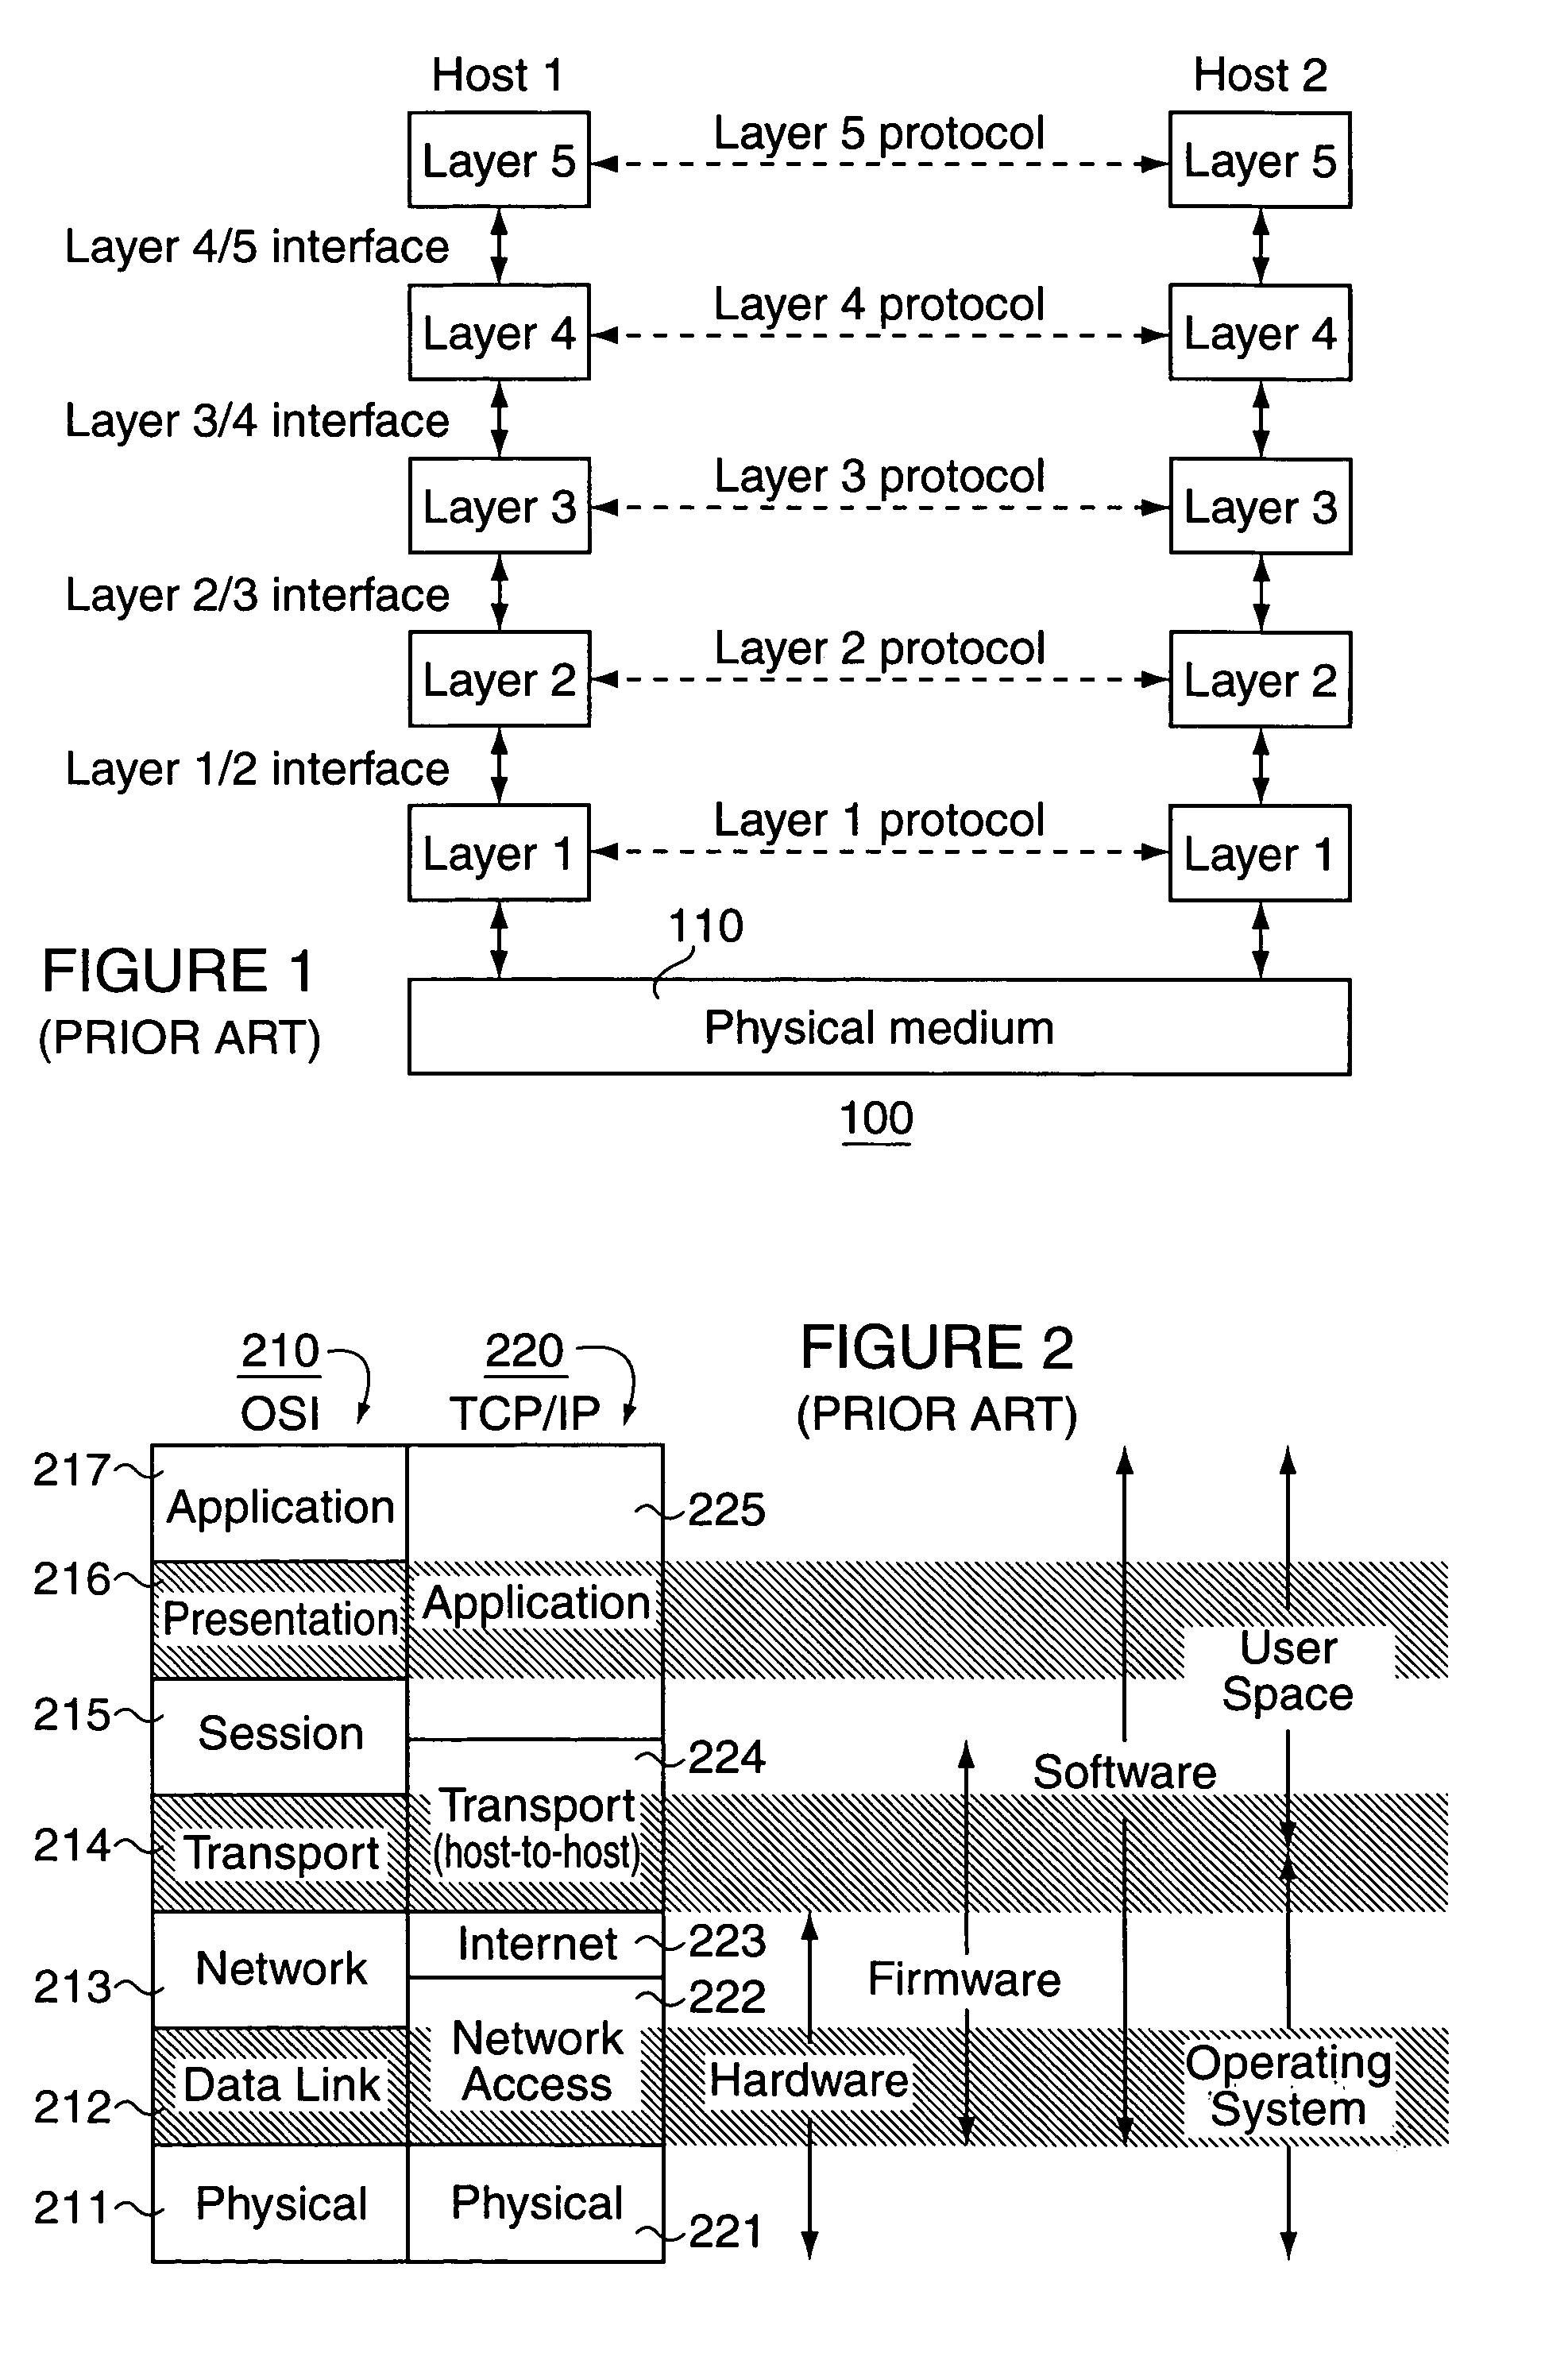 Simple peering in a transport network employing novel edge devices